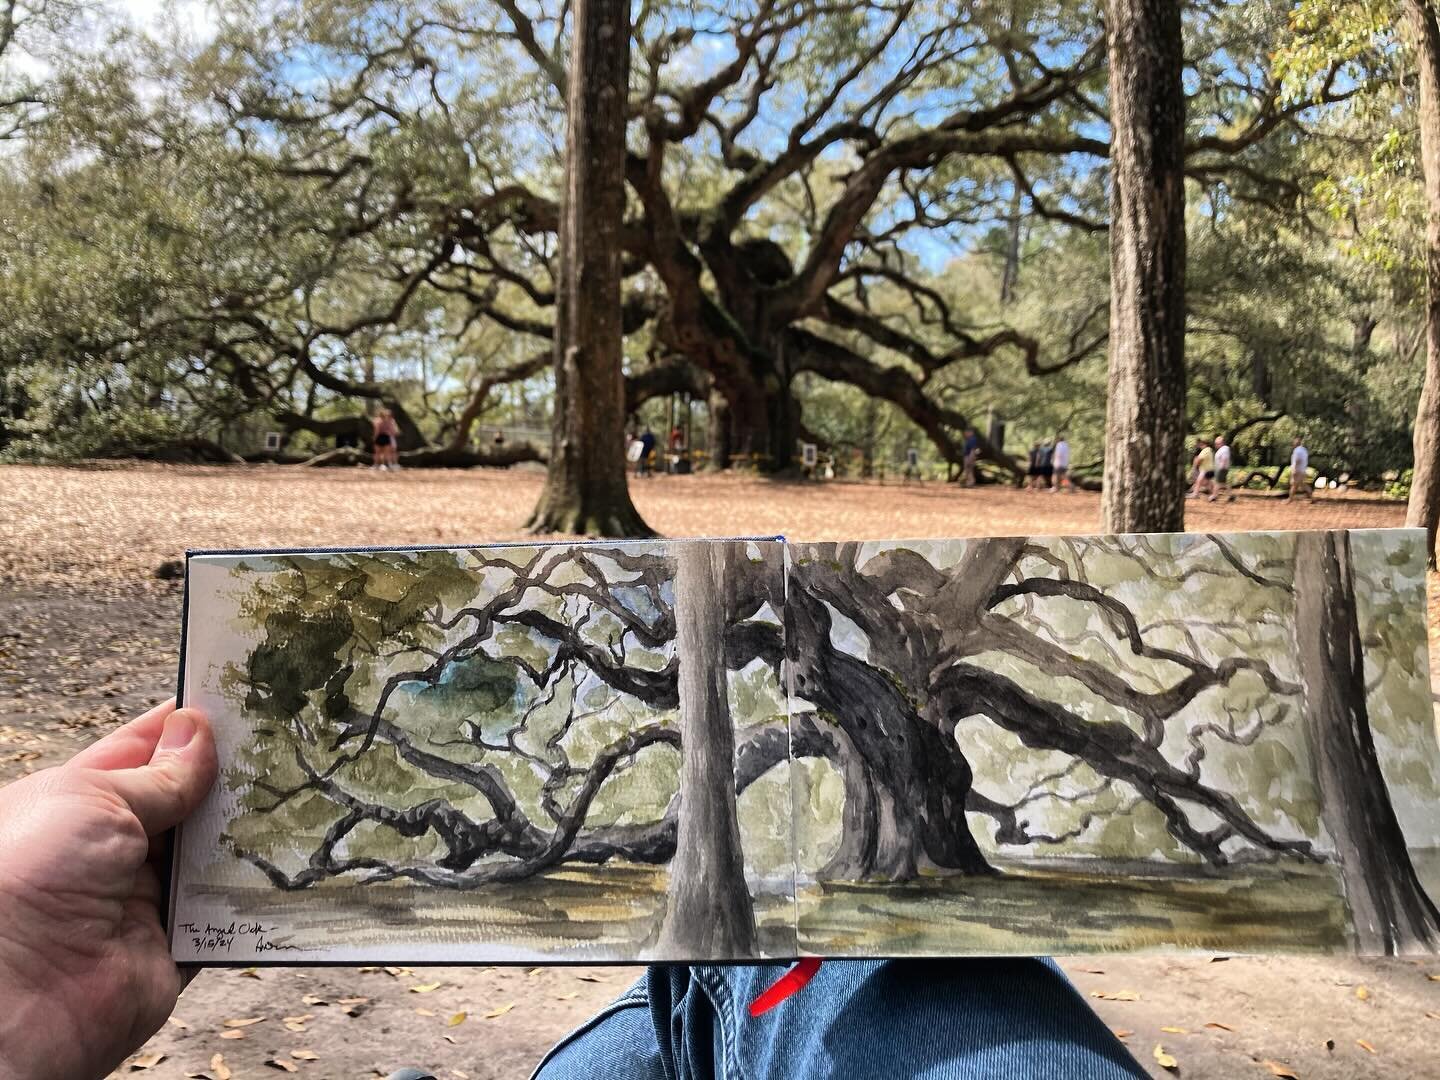 So nice to be in Charleston again. I&rsquo;ve heard about the Angel Oak for years, and even mentioned it in my book (The God of the Garden), but today was my first chance to see it in person and do some painting. I read somewhere that it&rsquo;s the 